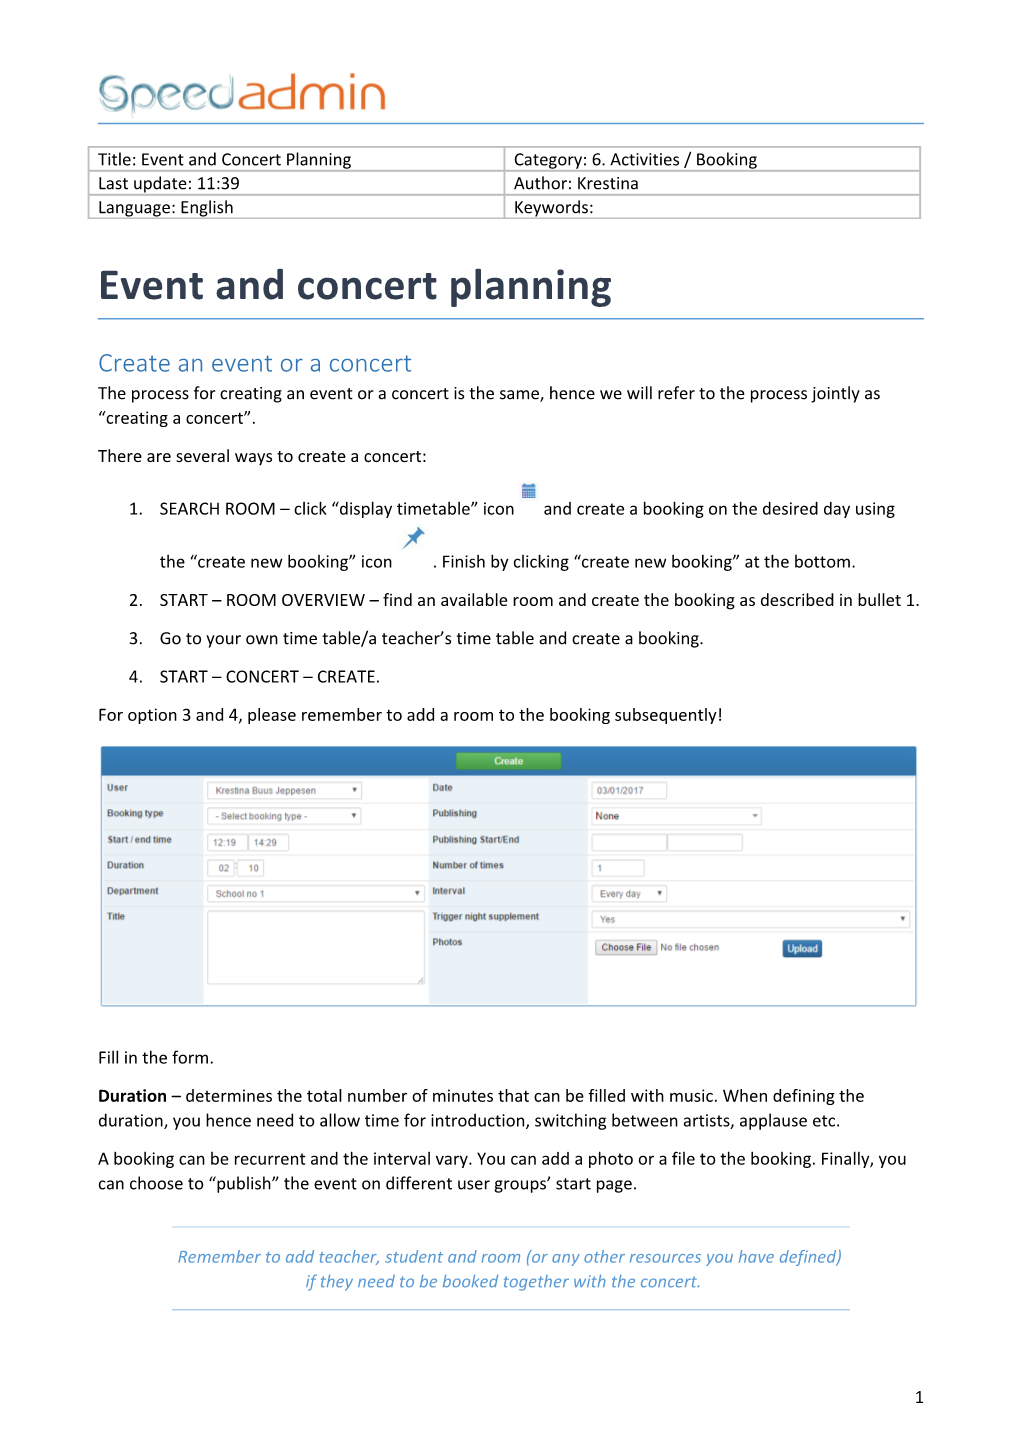 Event and Concert Planning